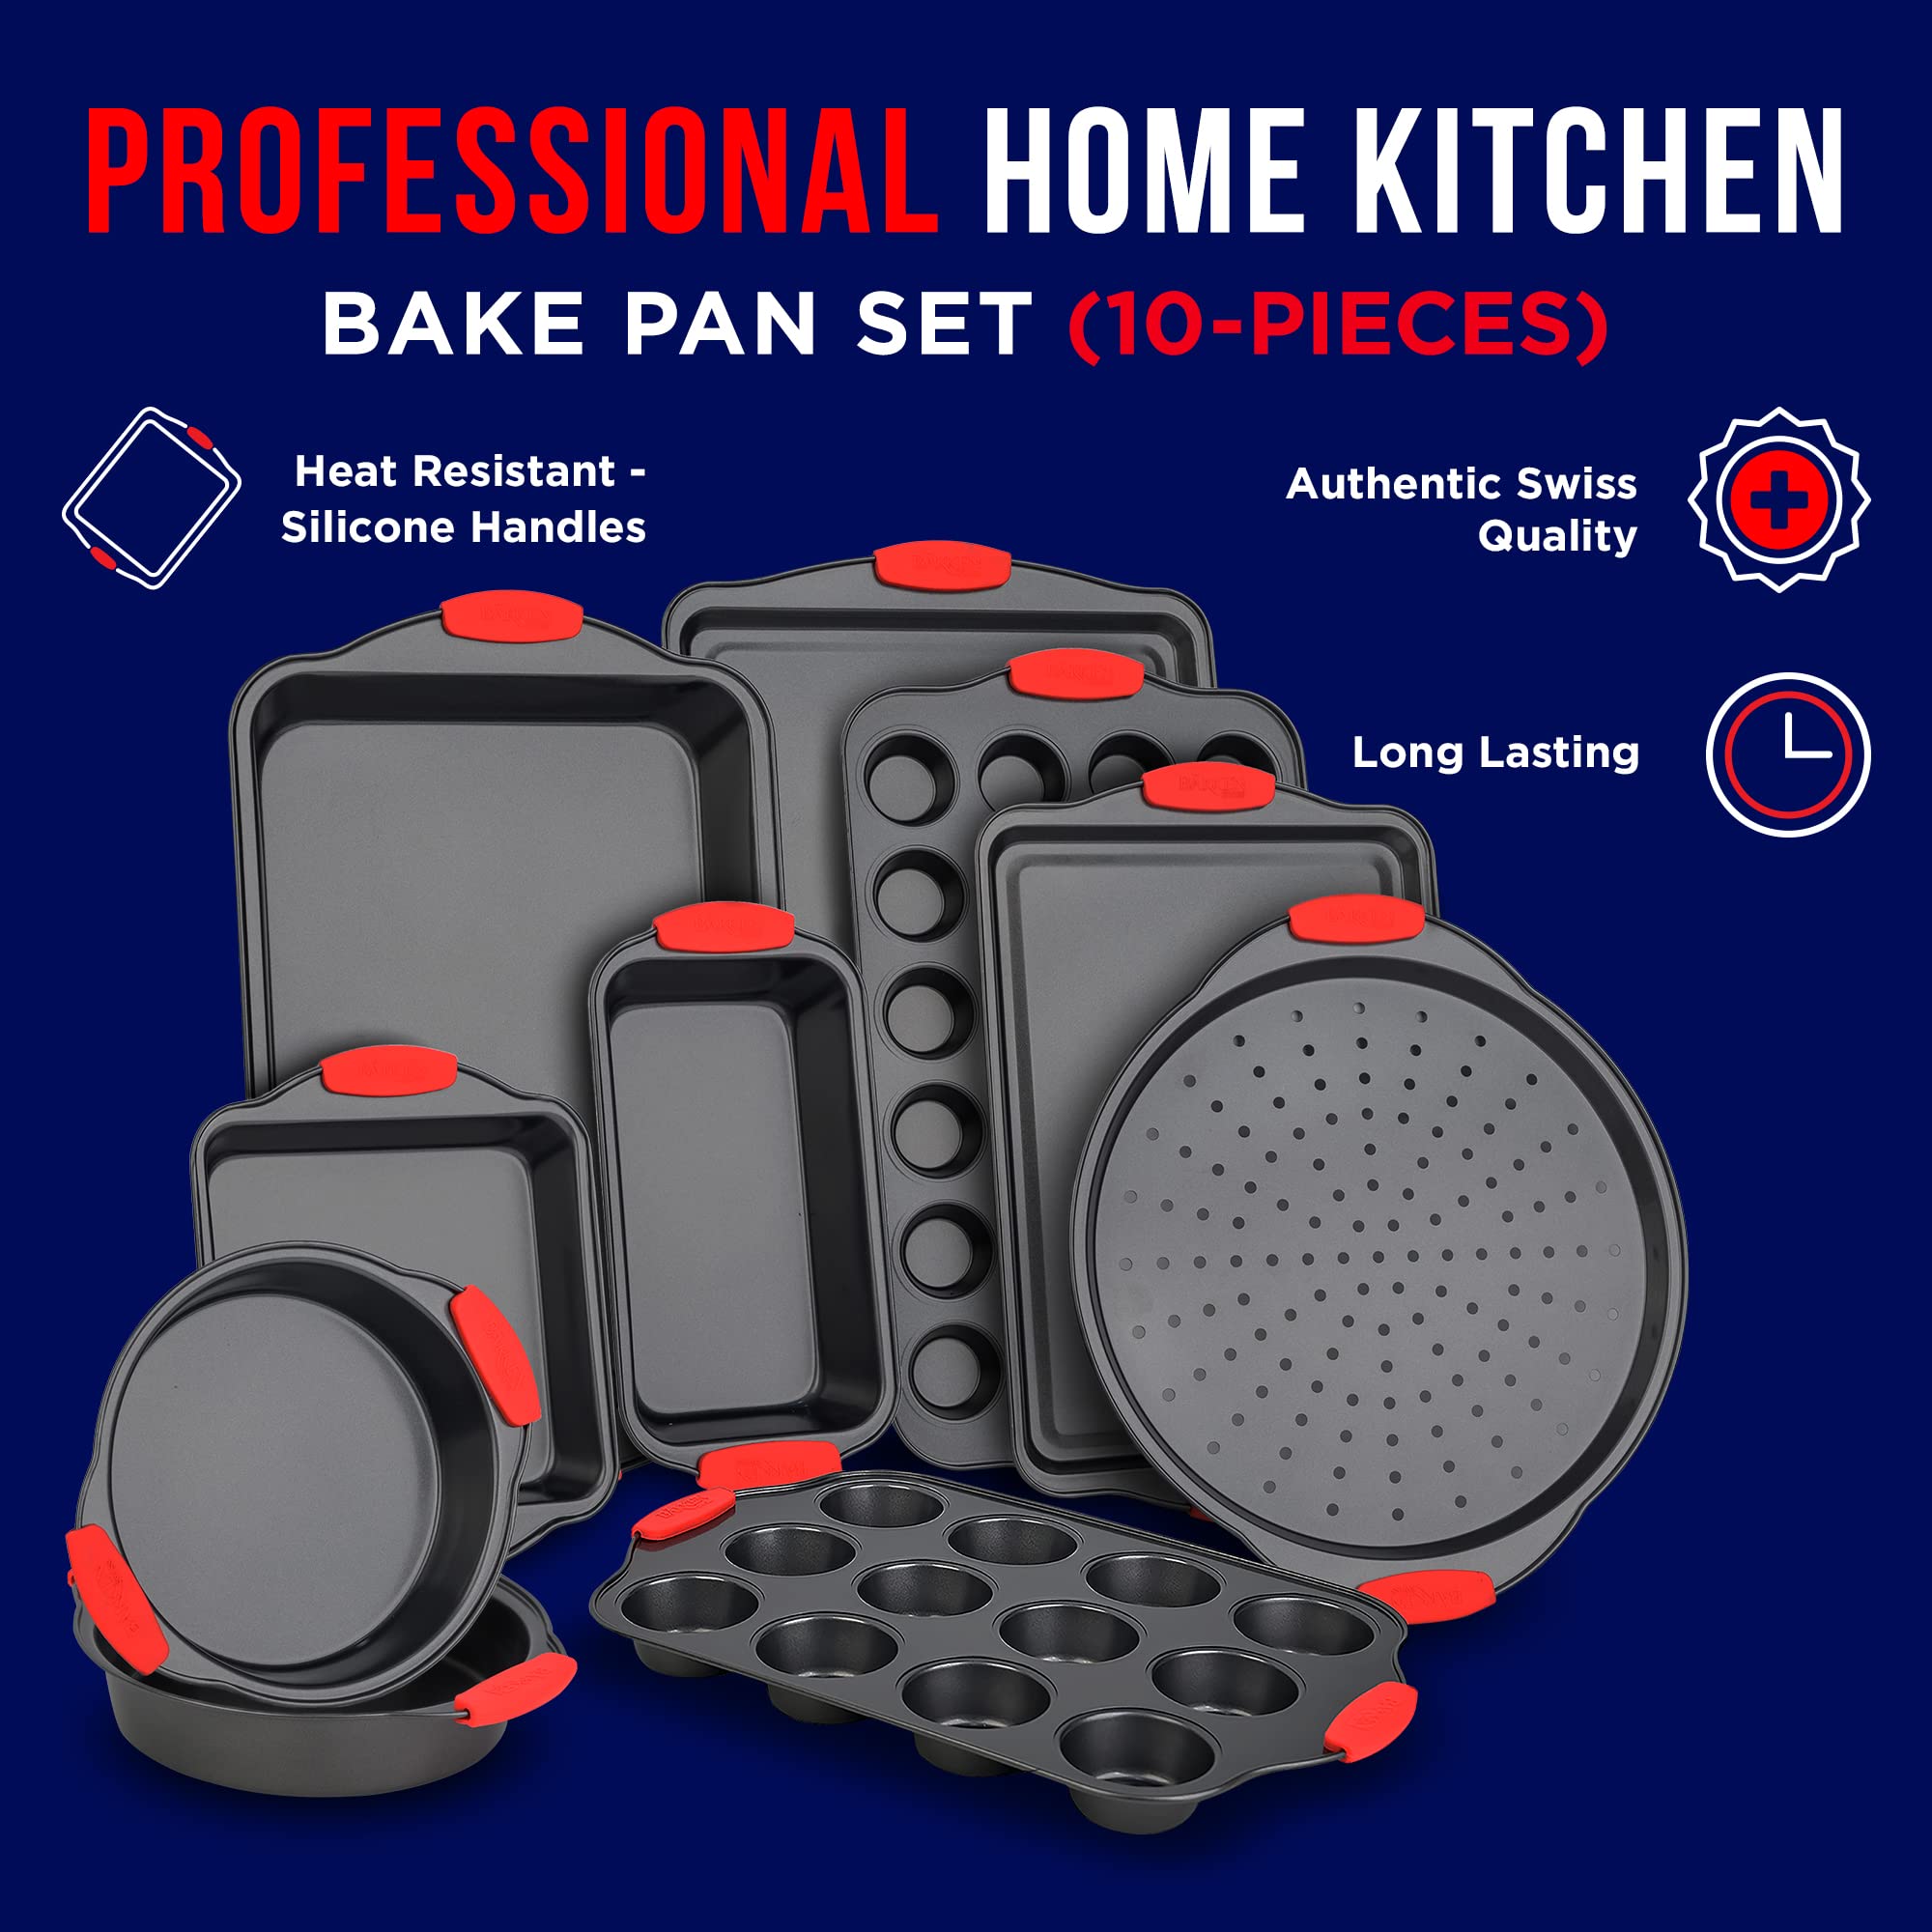 Baking Set – 10 Piece Kitchen Oven Bakeware Set – Deluxe Non-Stick Blue Coating Inside and Outside – Carbon Steel – Red Silicone Handles – PFOA PFOS and PTFE Free by Bakken